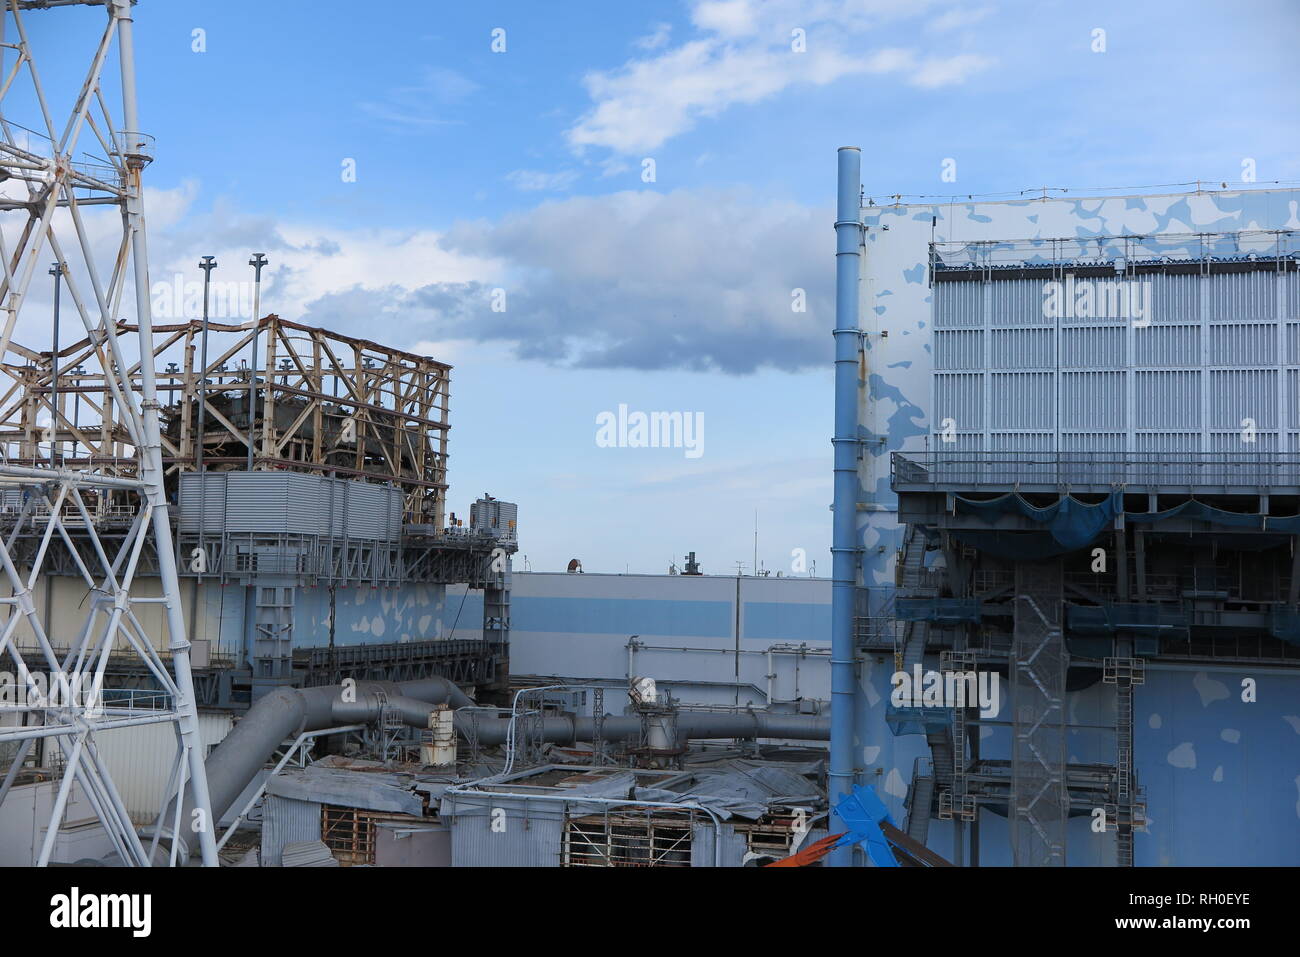 31 January 2019, Japan, Fukushima: View of the severely damaged reactor 1 (l) of the atomic ruin Fukushima Daiichi and on the right reactor 2. On 11 March 2011 the power plant had reached Super Gau due to an earthquake and tsunami. Due to the radioactive radiation from core meltdowns in three reactors, around 160,000 residents had to flee. More than 30,000 are still unable to return to their homes. It was the worst nuclear disaster since Chernobyl in 1986, but in the meantime, according to Tepco, the conditions of the thousands of workers have improved considerably and they no longer need to w Stock Photo